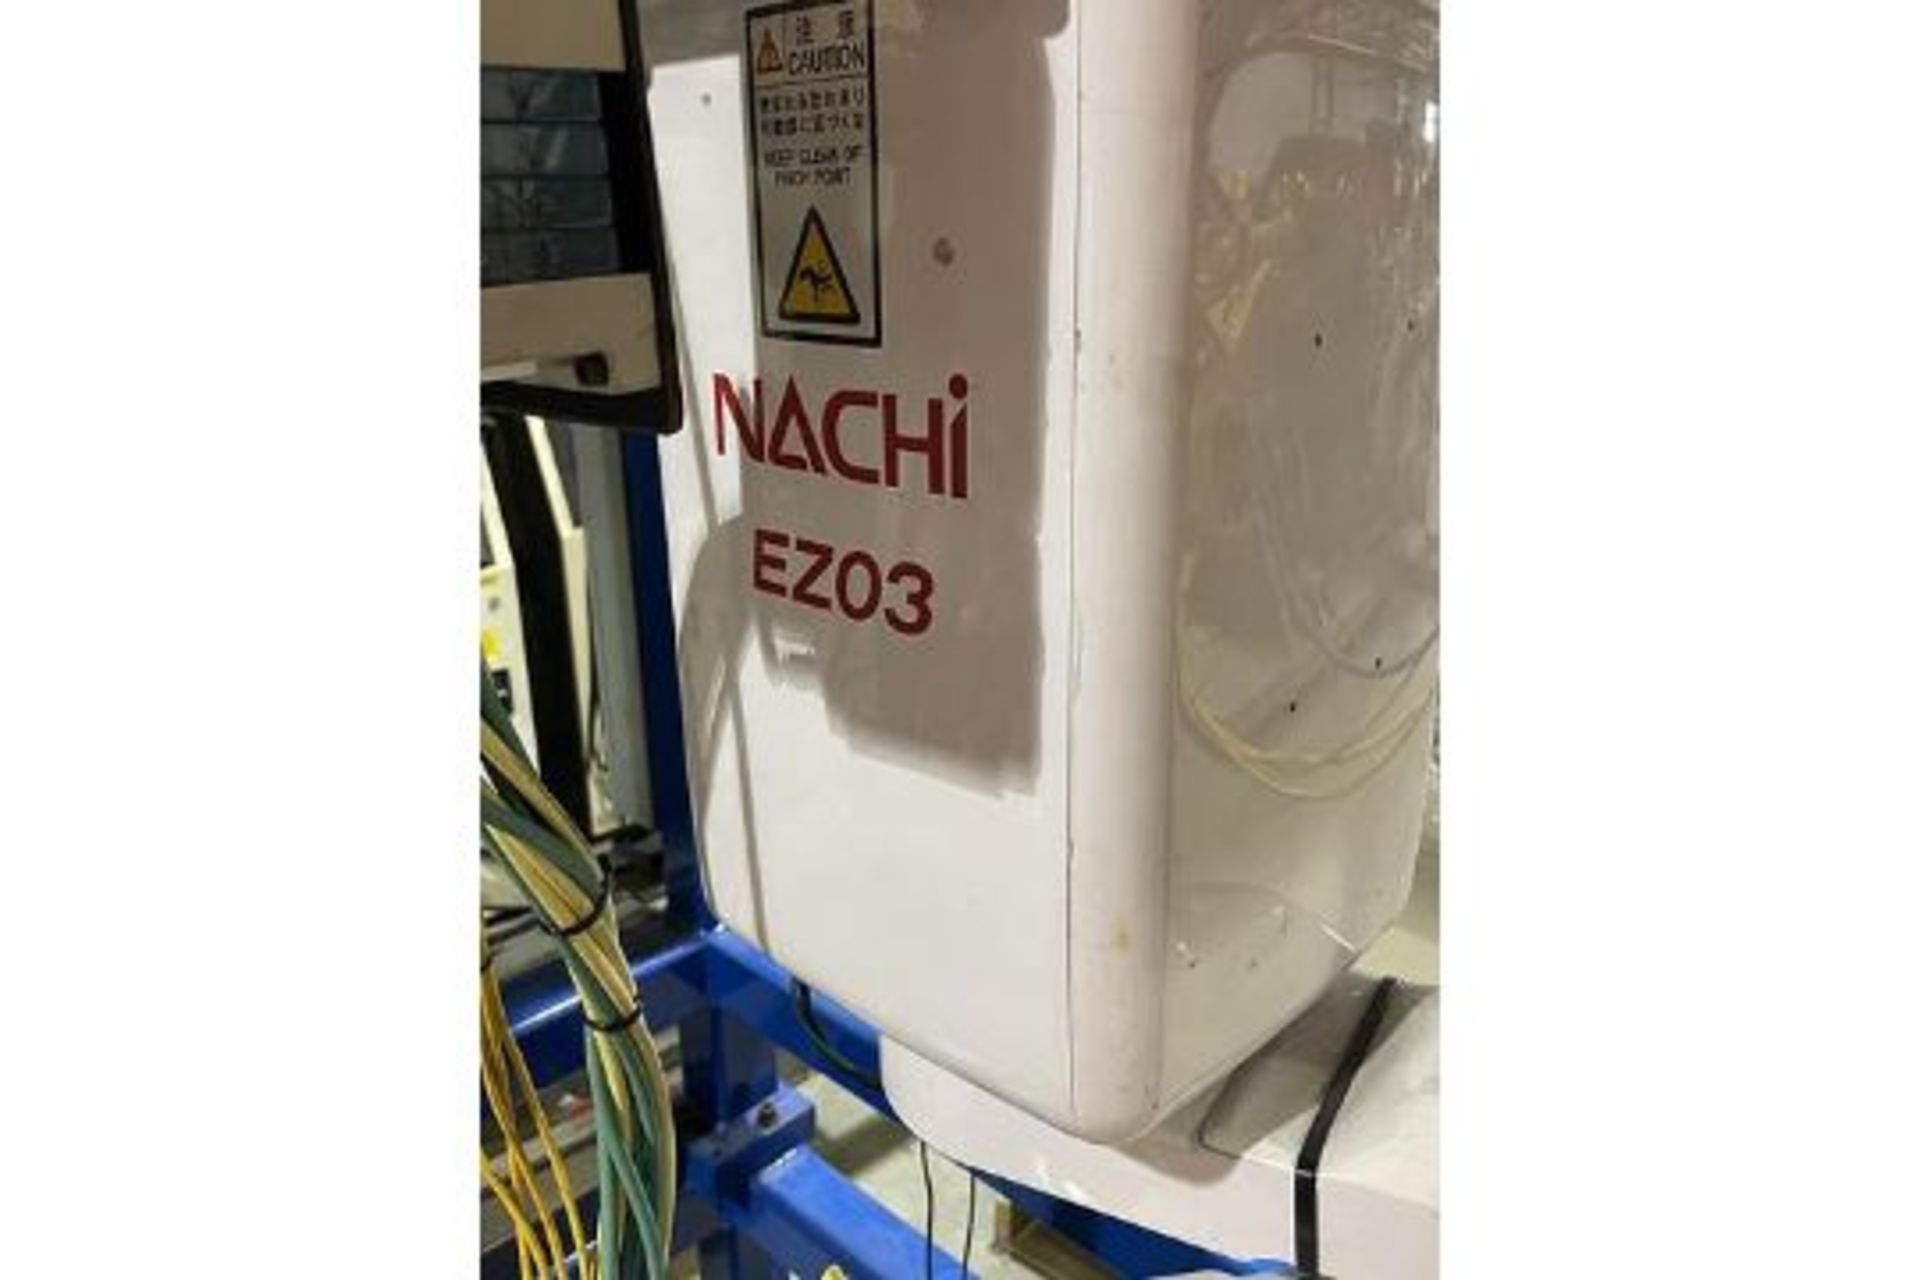 NACHI EZ03 INVERTED 4 AXIS SCARA ROBOT MOUNTED IN FABRICATED STAND WITH CONTROLLER - Image 10 of 10